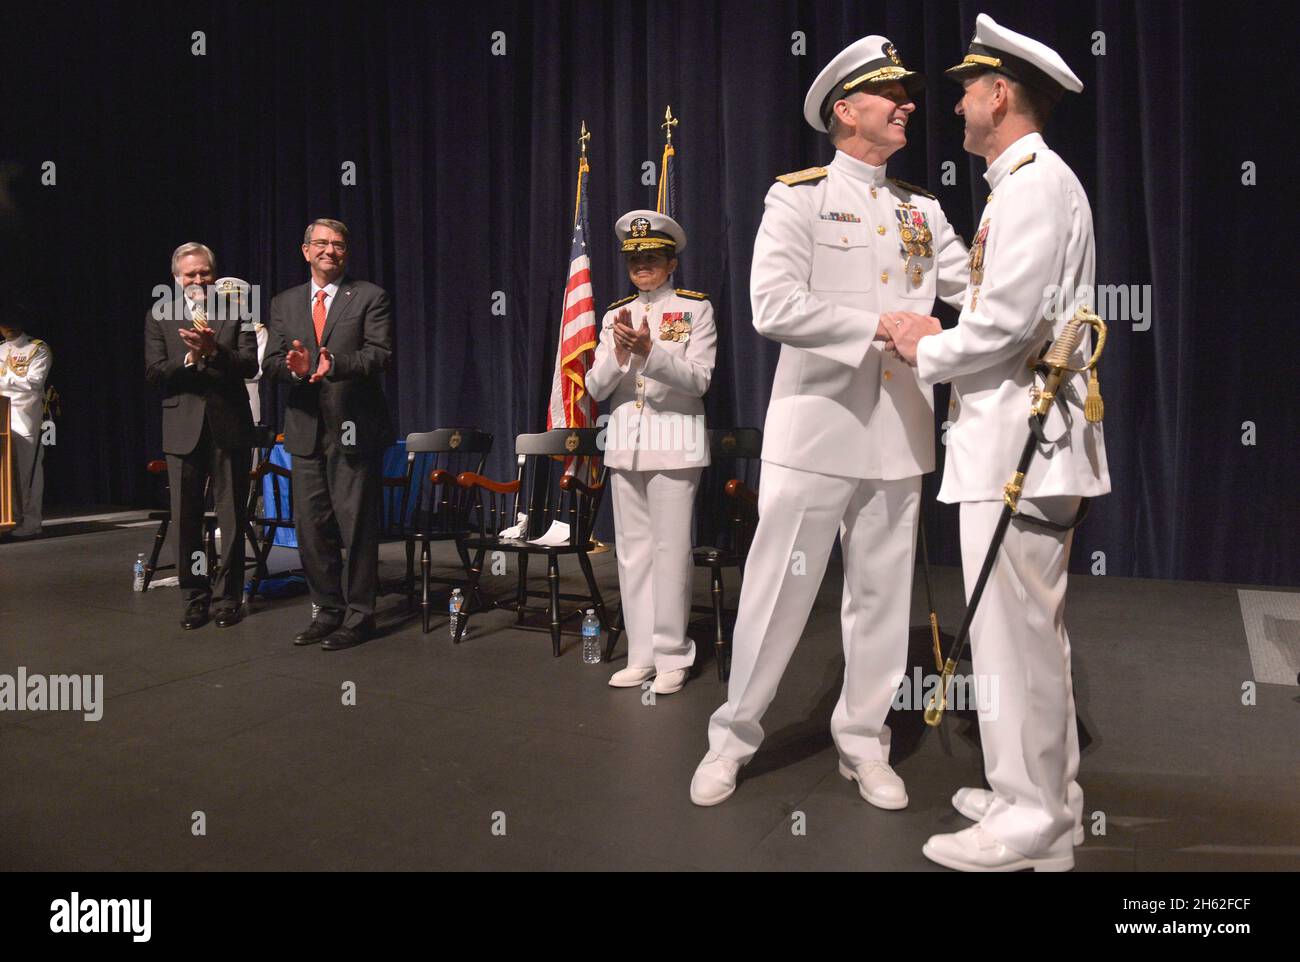 Outgoing and retiring Chief of Naval Operations Adm. Jonathan Greenert shakes hands with incoming CNO Adm. John Richardson after officially reading their orders during a change of command ceremony held at the U.S. Naval Academy in Annapolis, Md., Sept. 18, 2015 Stock Photo